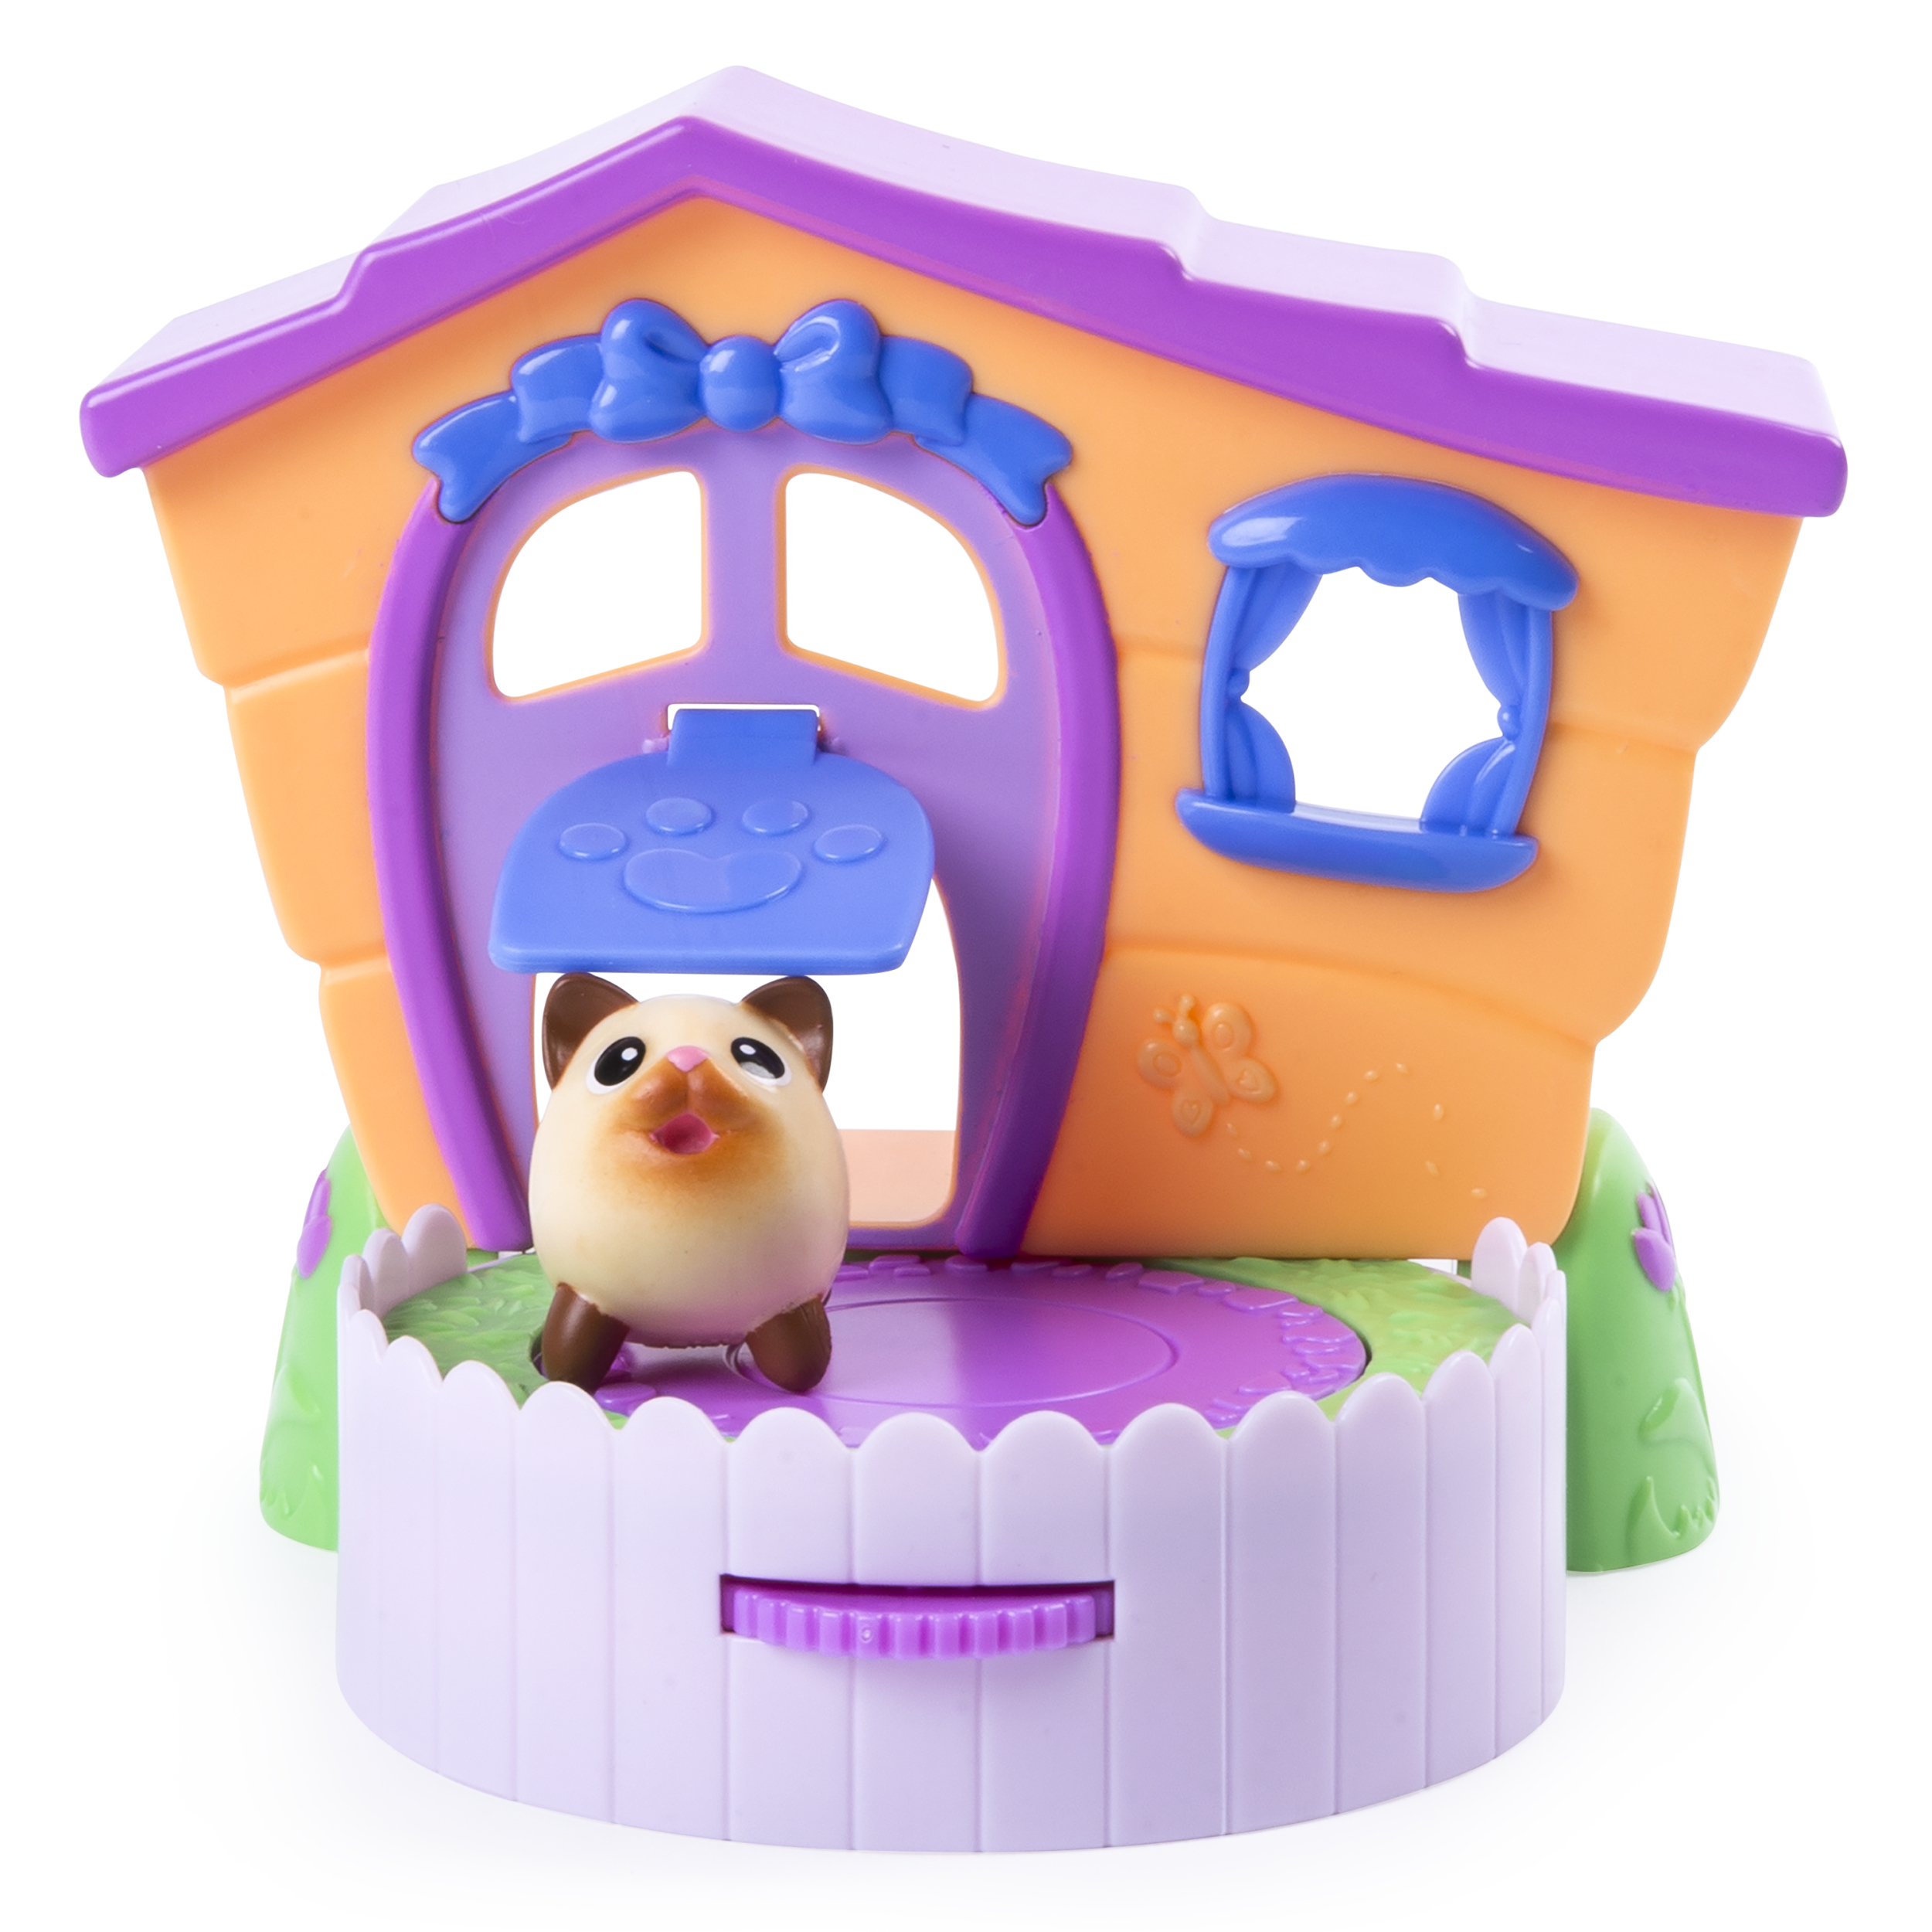 Chubby Puppies & Friends ? 2-in 1 Flip N? Play House Playset with Siamese Kitty Collectible Figure - image 4 of 6